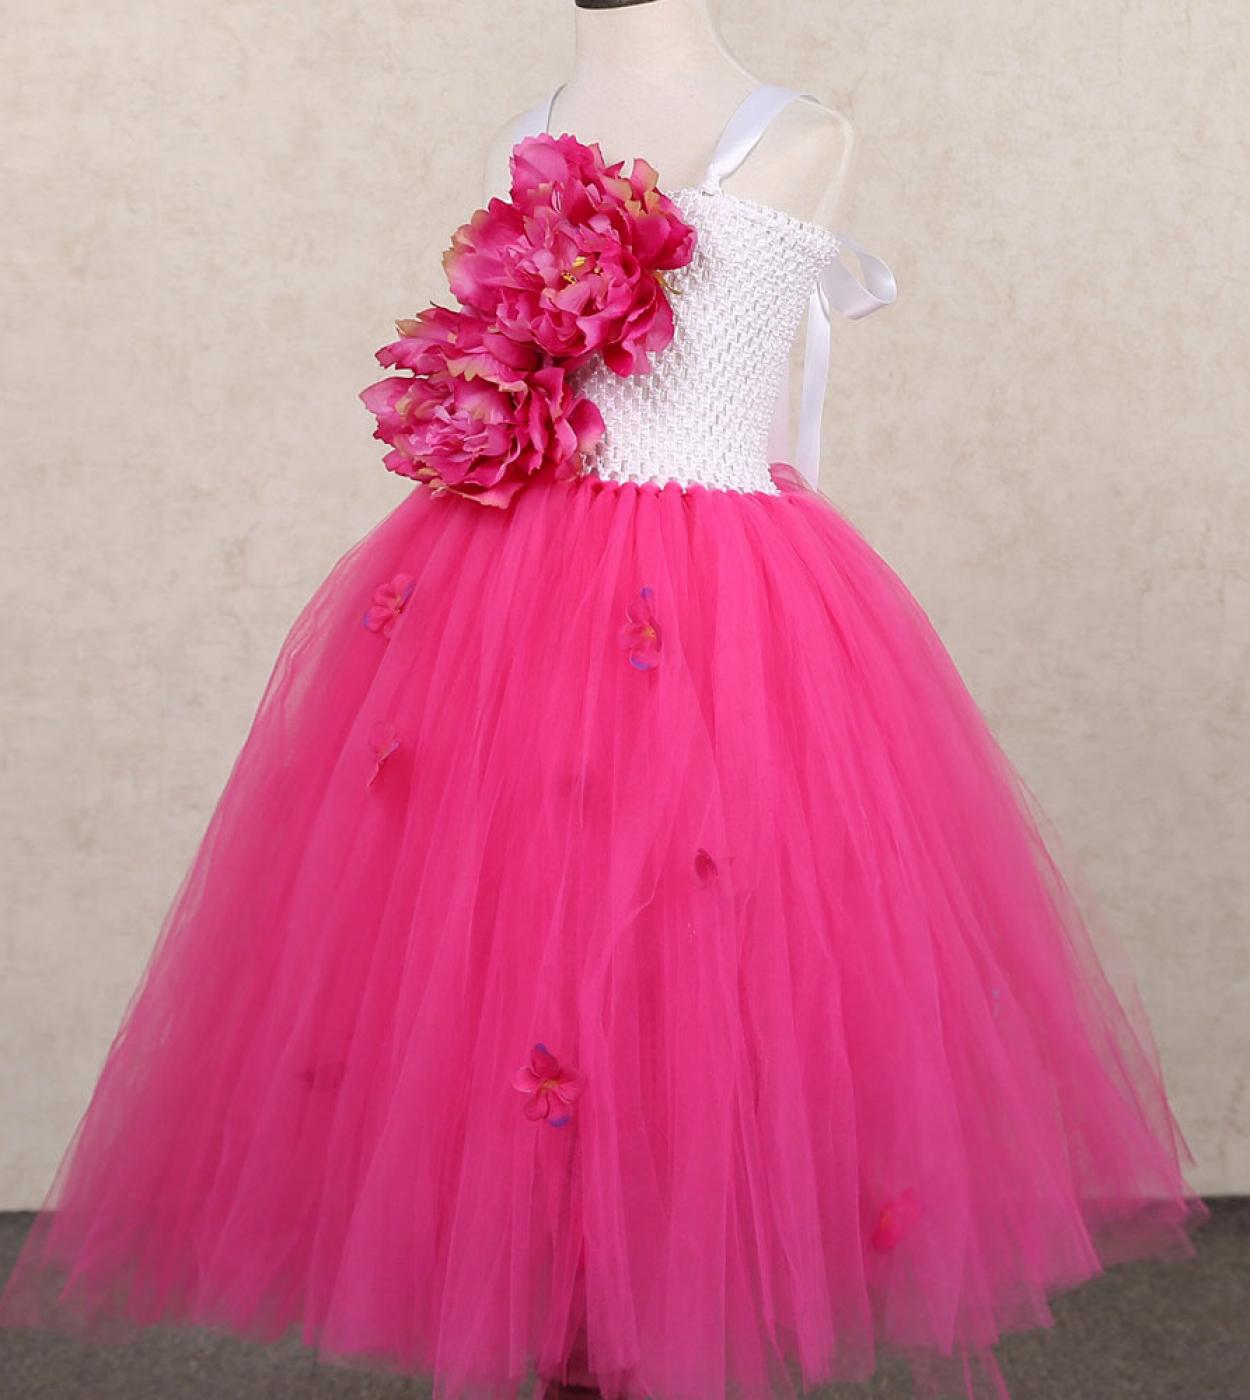 Peony Flower Girl Dresses For Wedding Party Girls Bridesmaid Ball Gown Kids Tutu Costumes Princess Fairy Long Dress Full